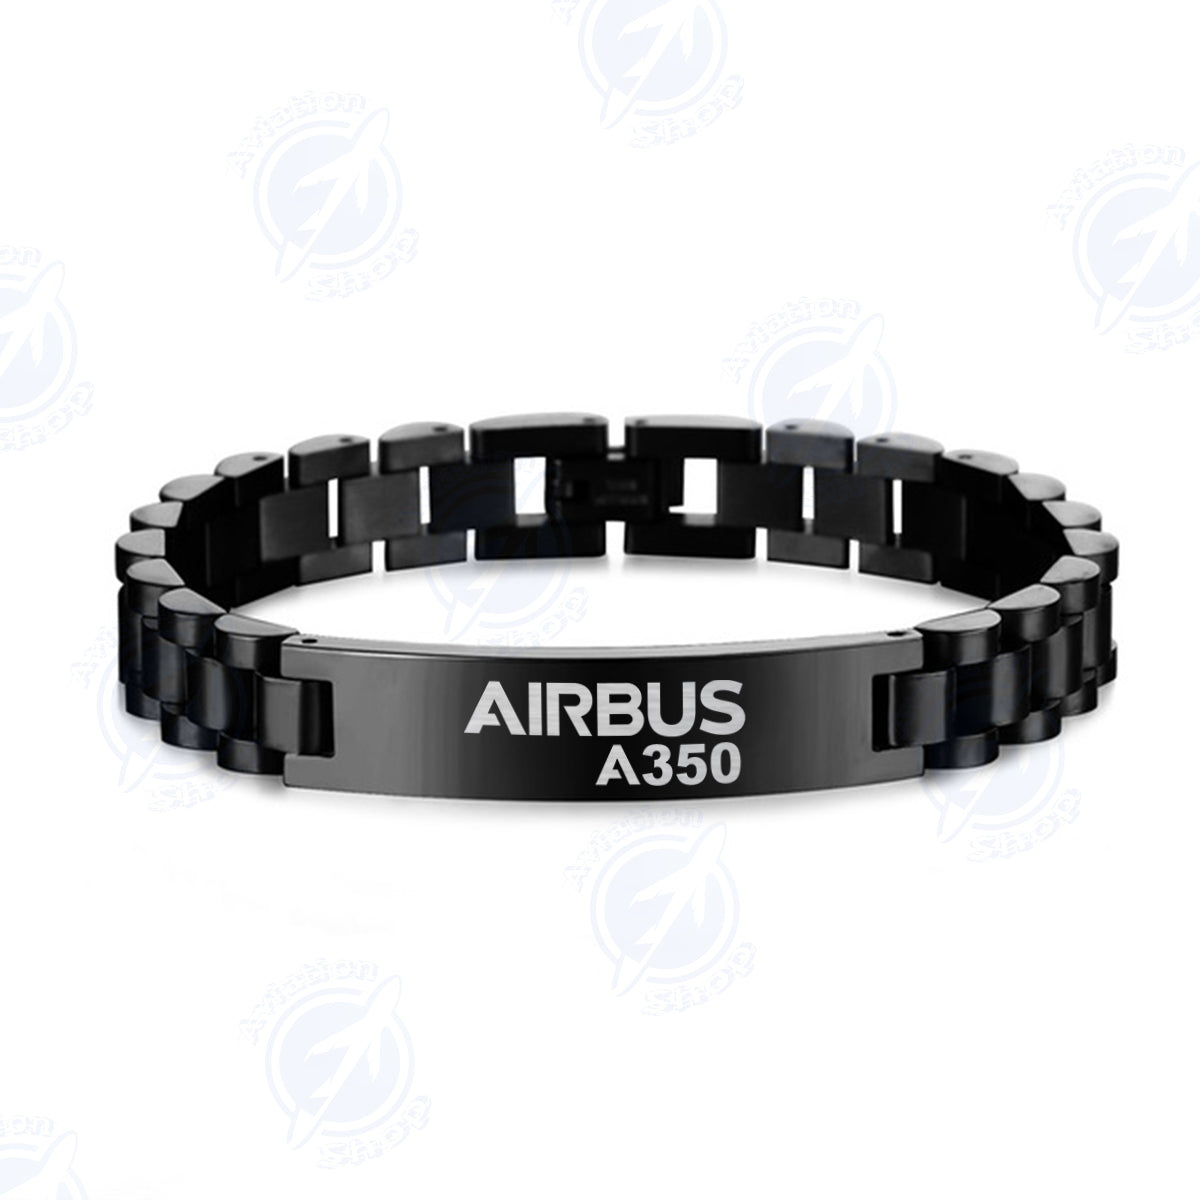 Airbus A350 & Text Designed Stainless Steel Chain Bracelets